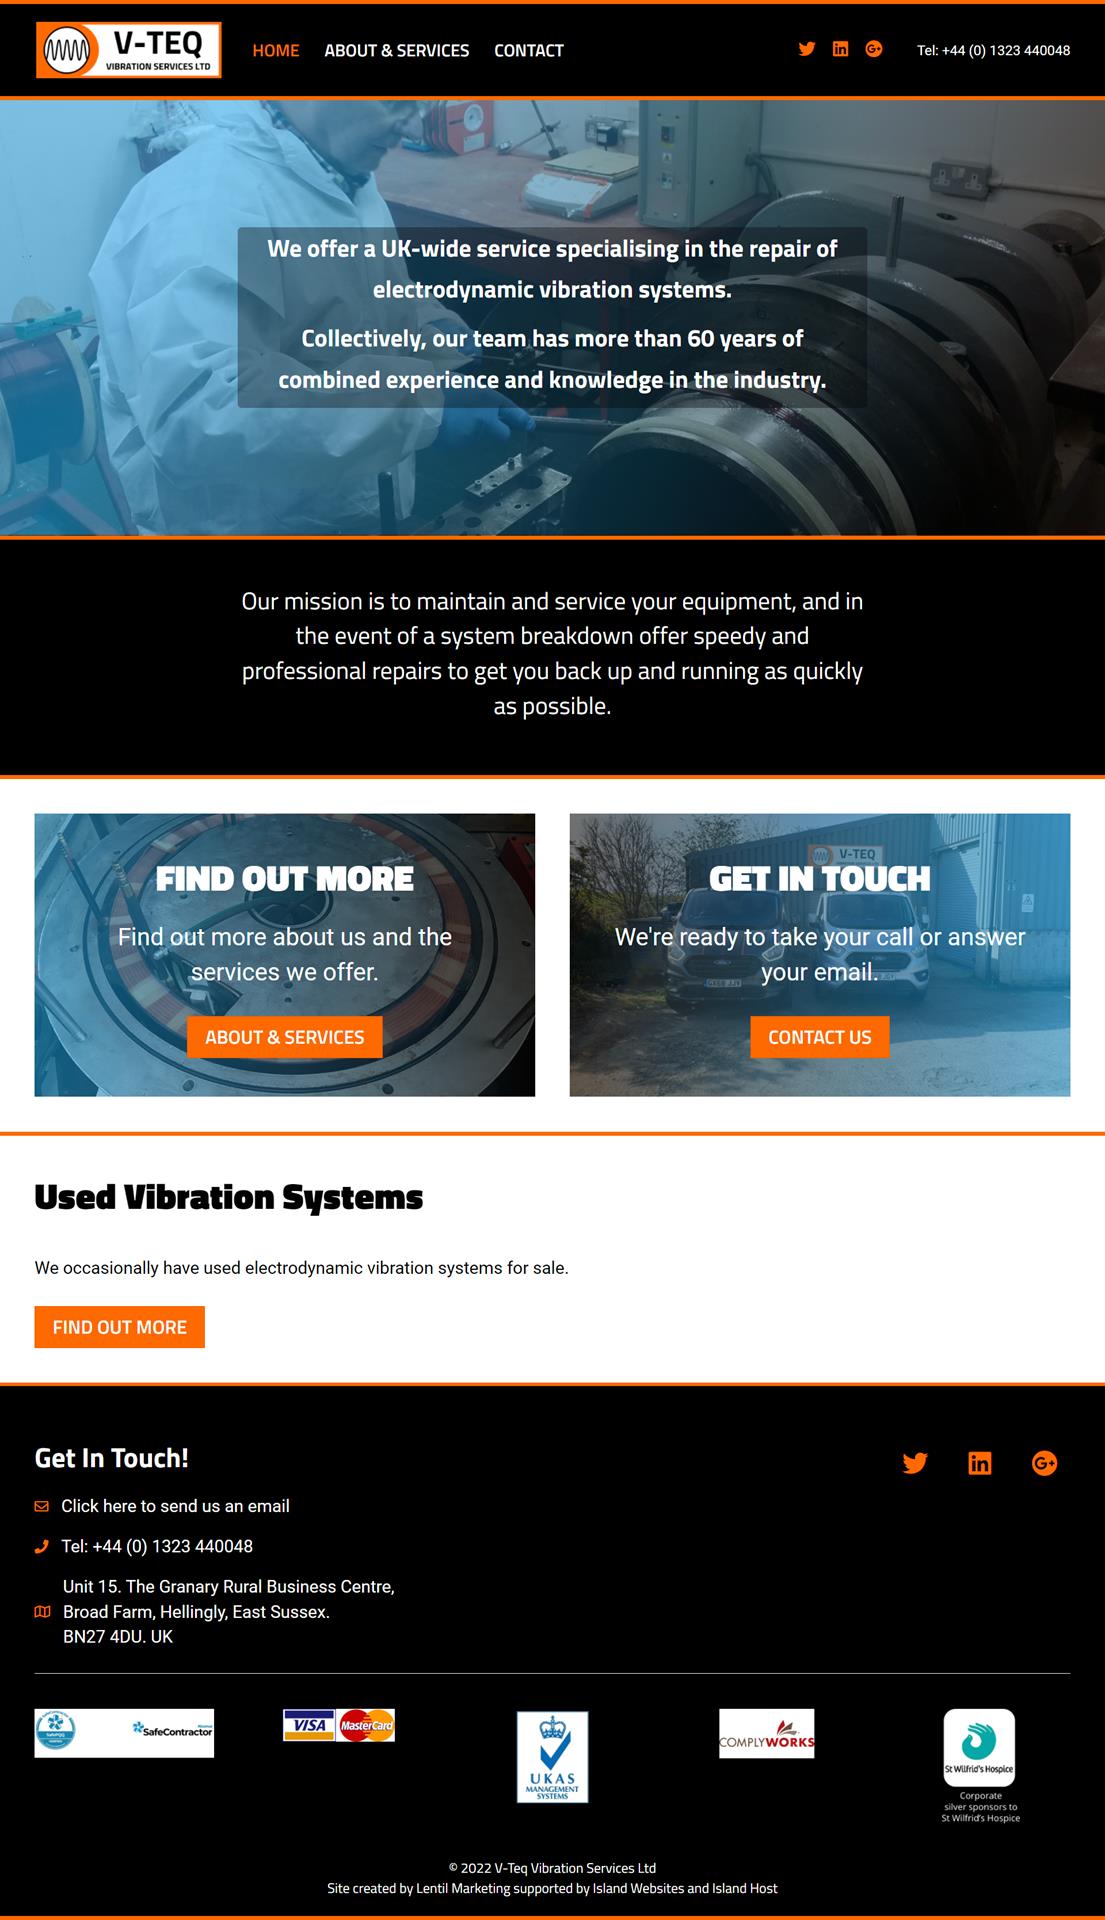 home page of the V-Teq website, showing an engineer working on an electrodynamic vibration system